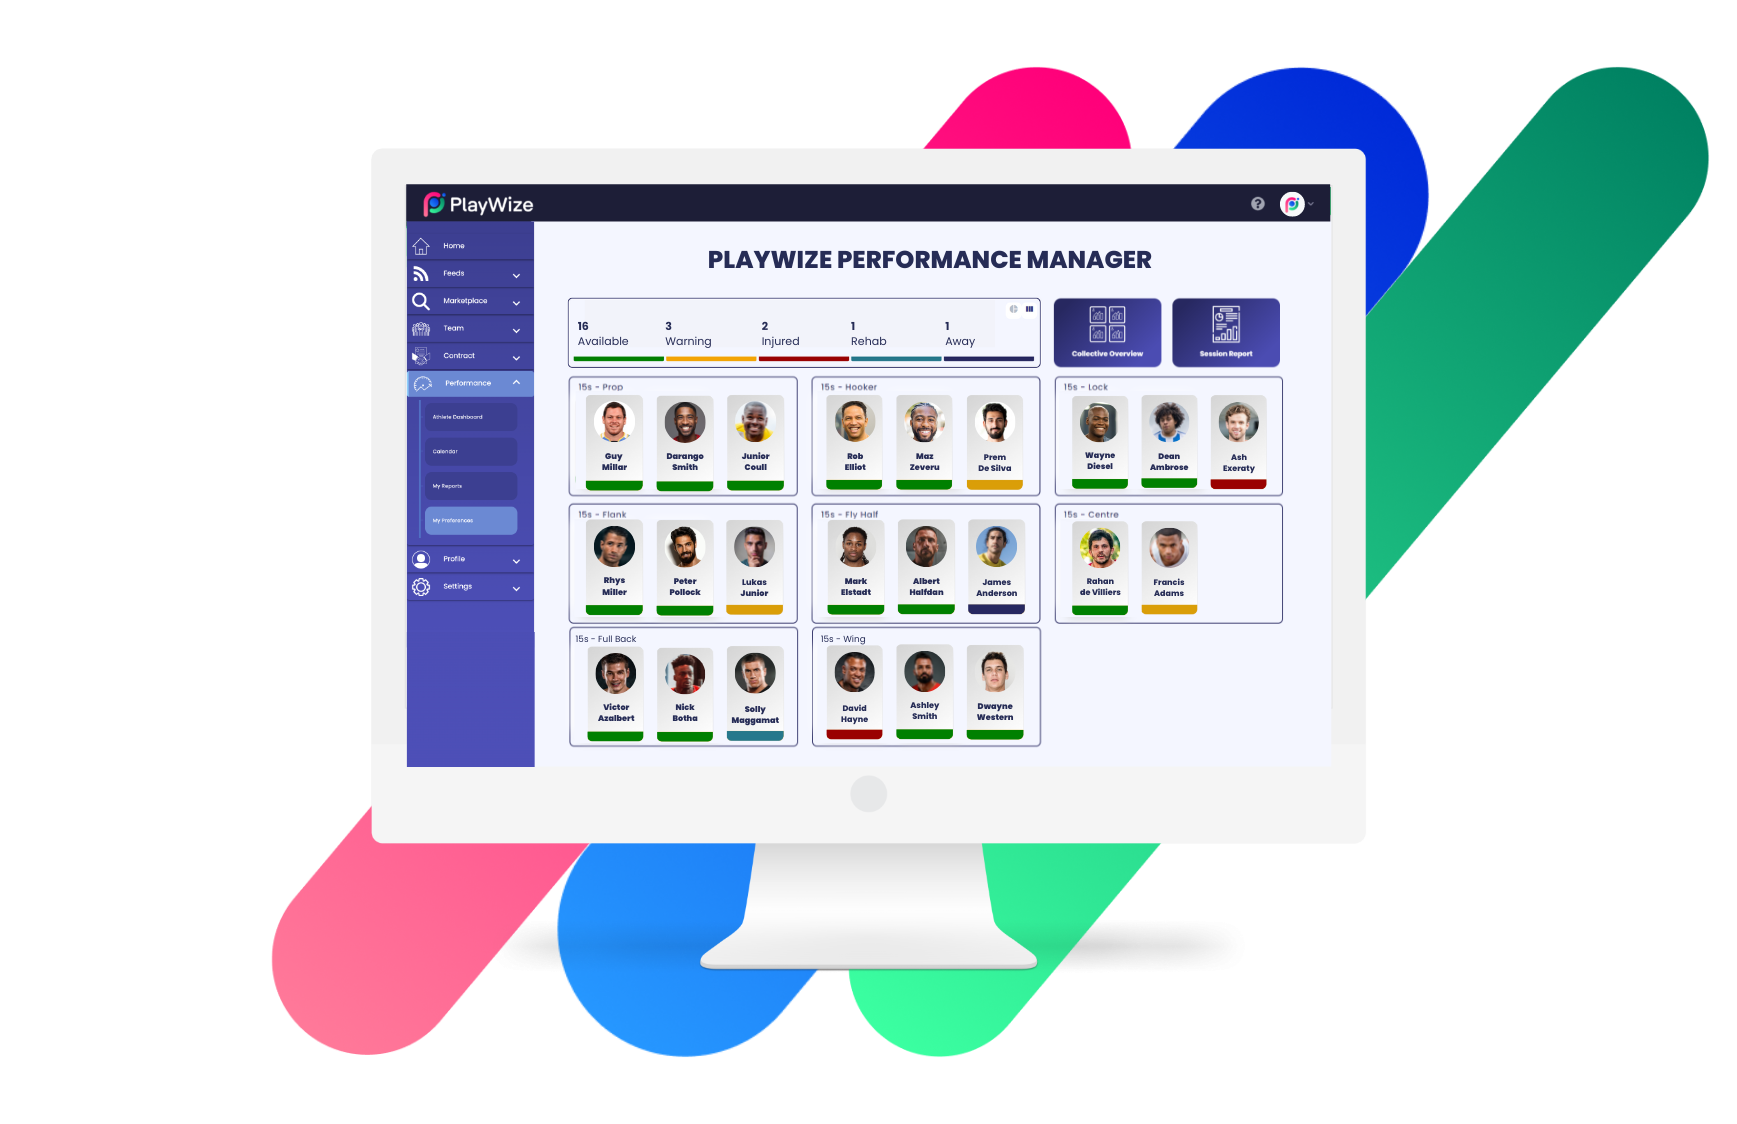 PlayWize Performance Manager